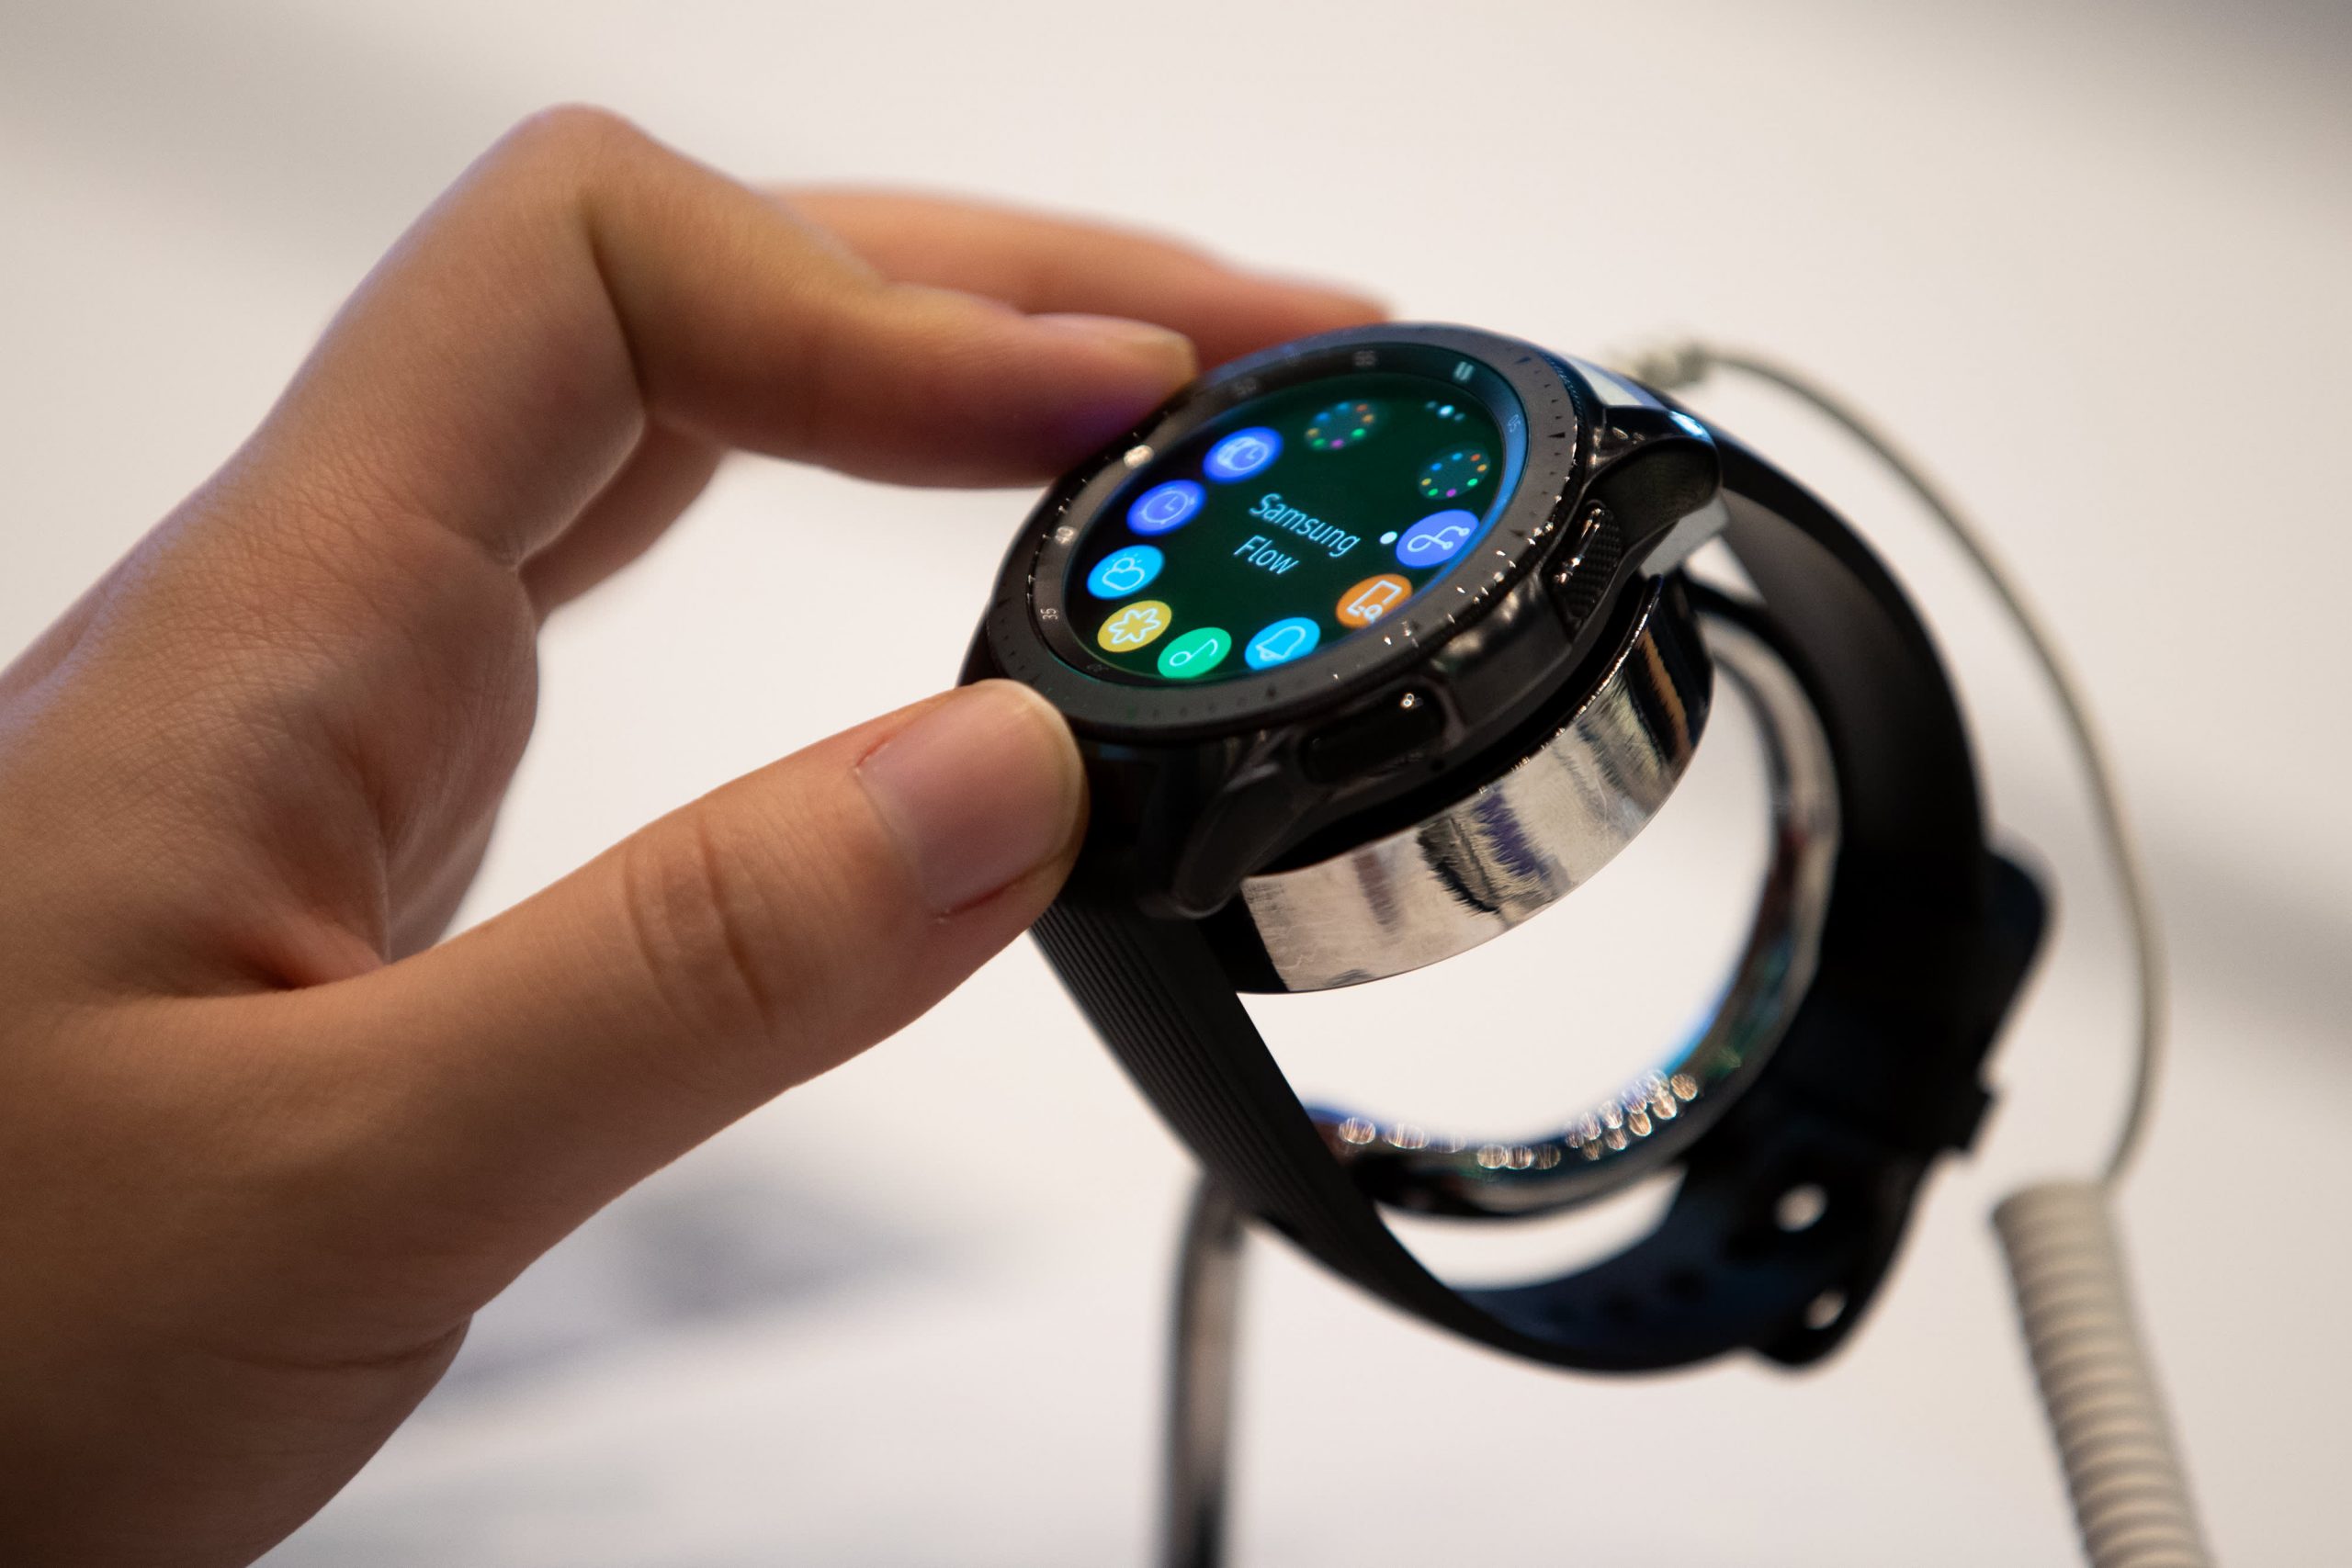 Samsung wearable system gross sales are up greater than 30% this yr